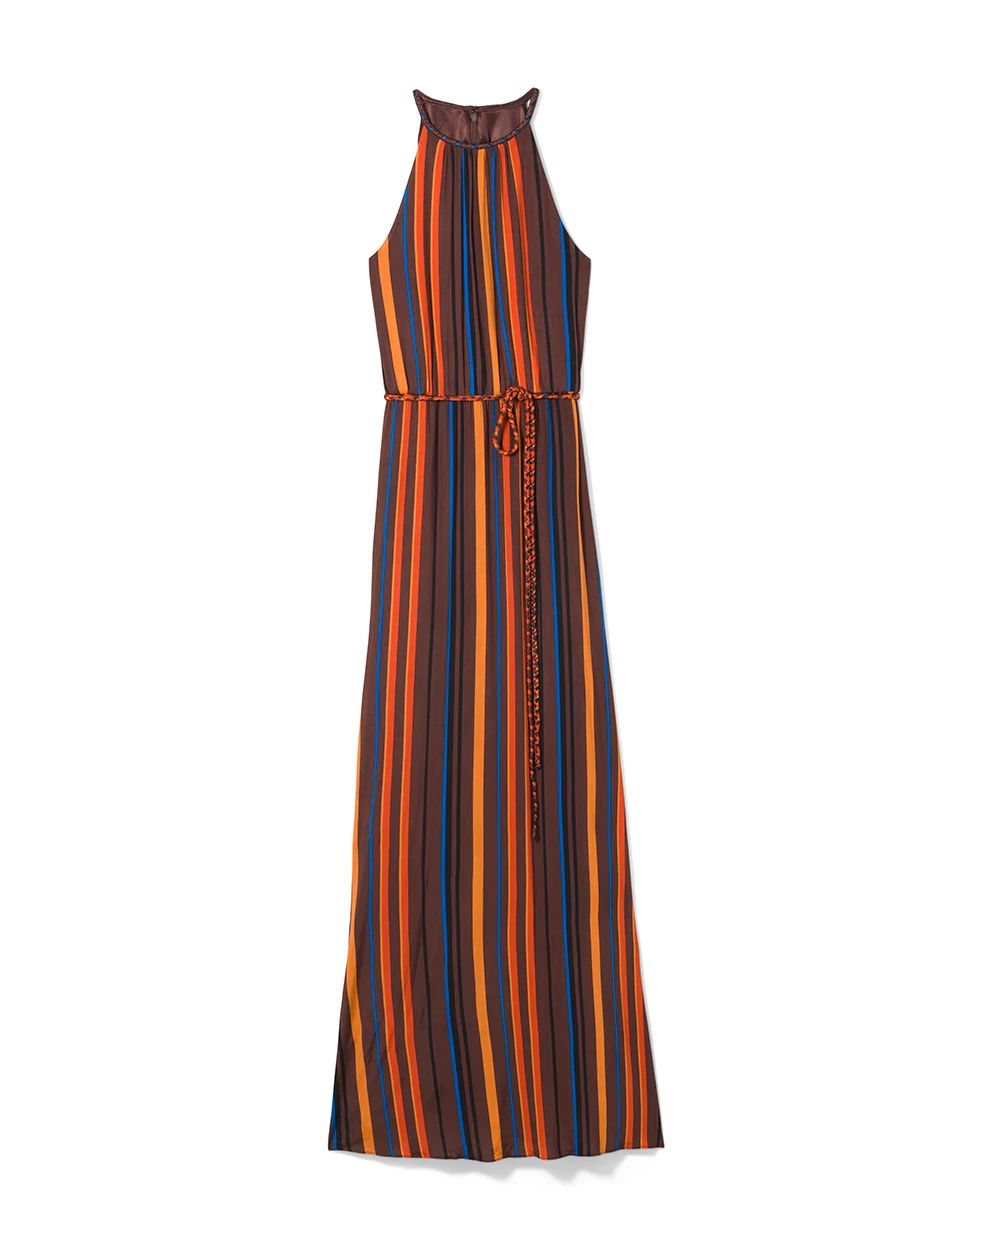 Multi-Stripe Halter Maxi Dress click to view larger image.